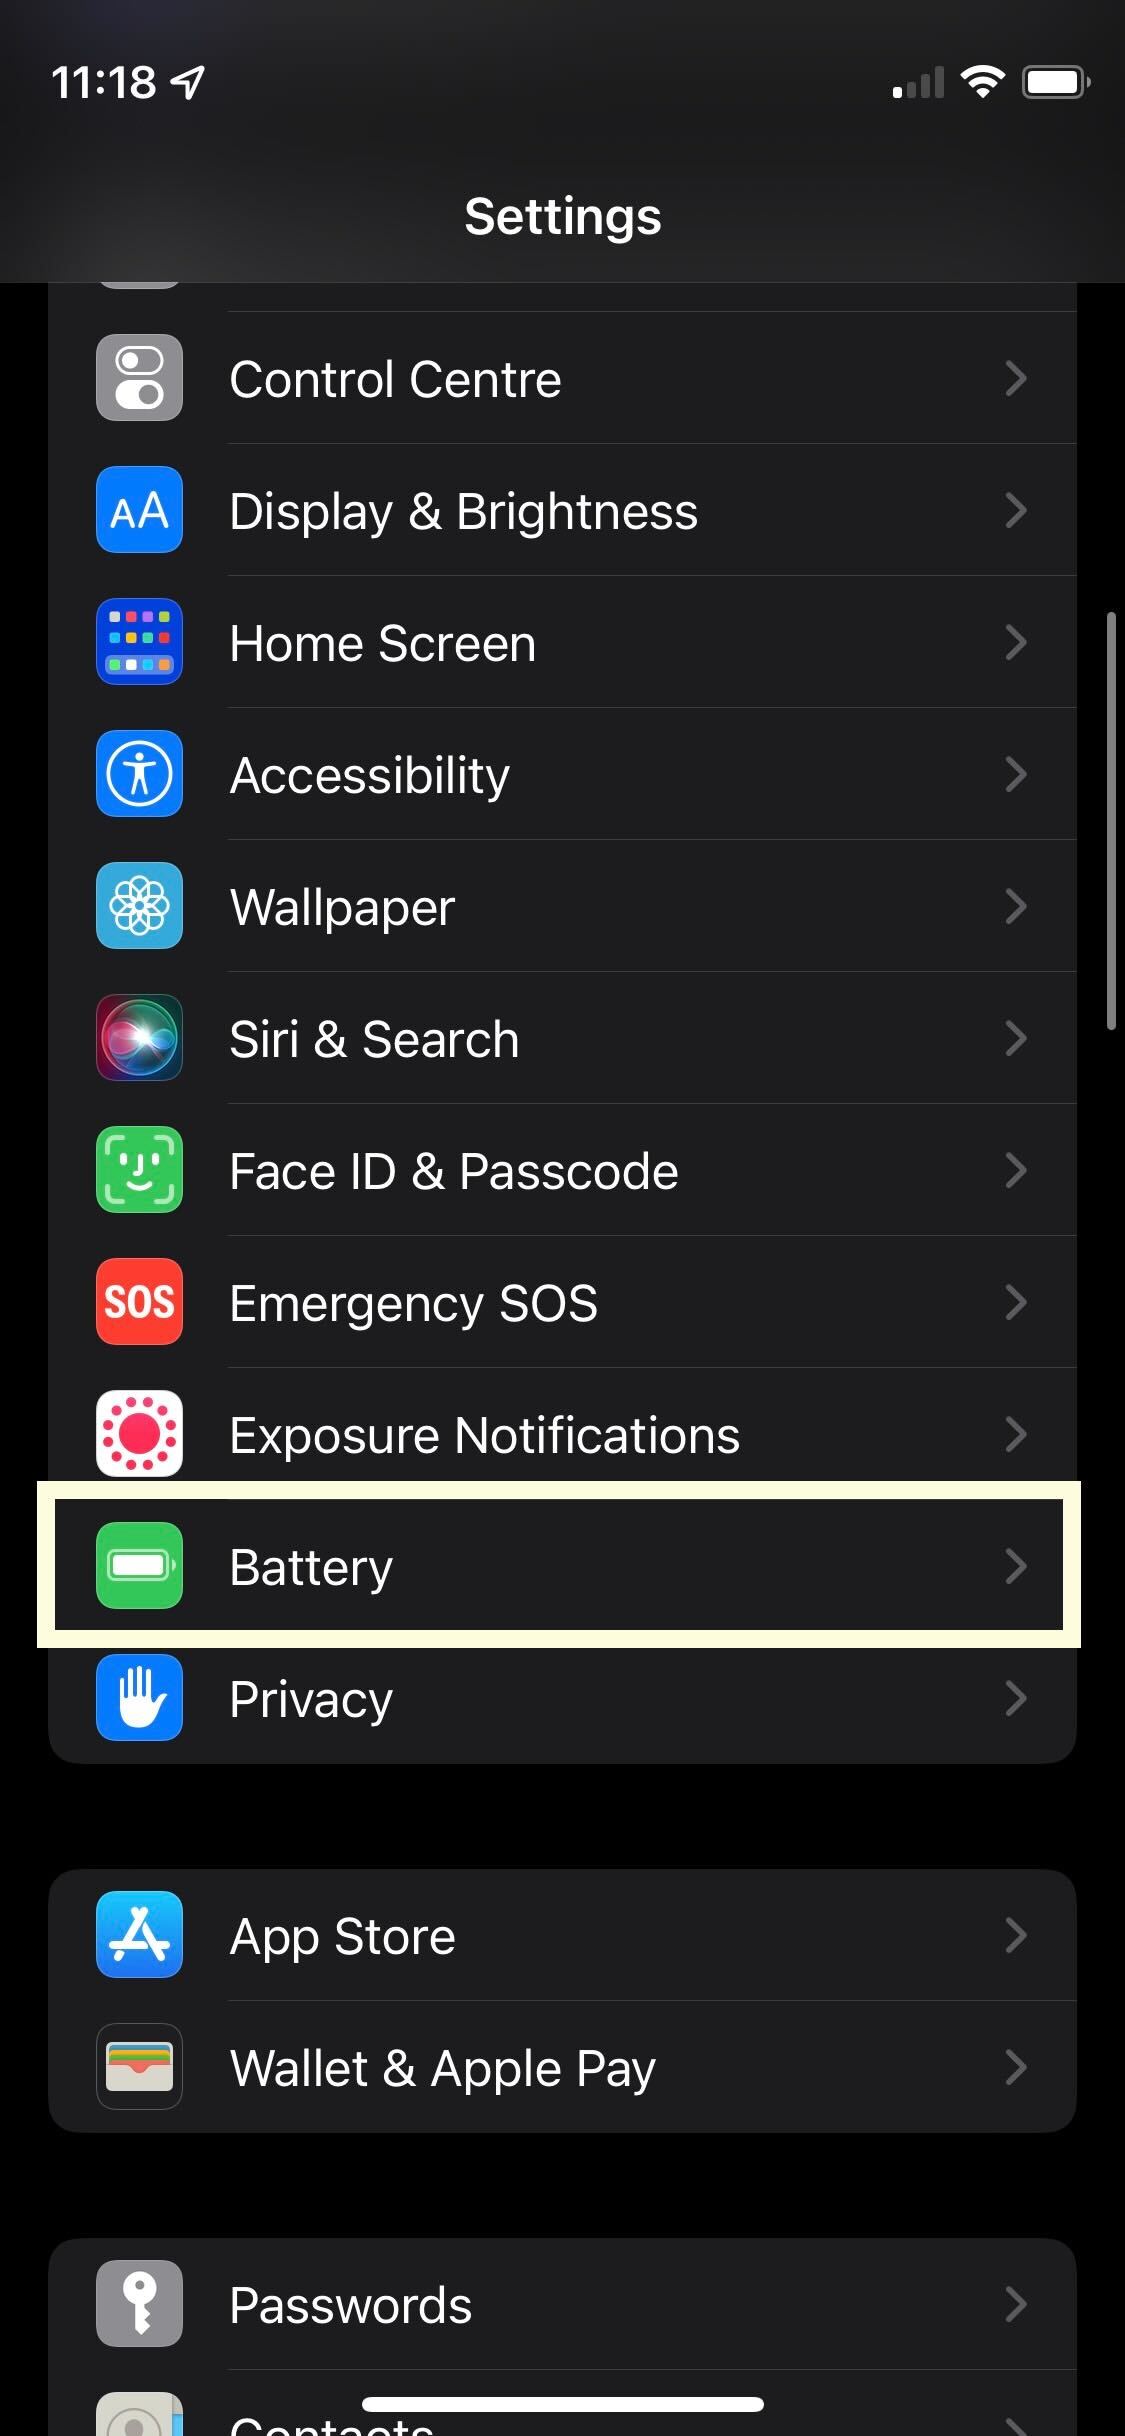 Battery button on Settings on iPhone